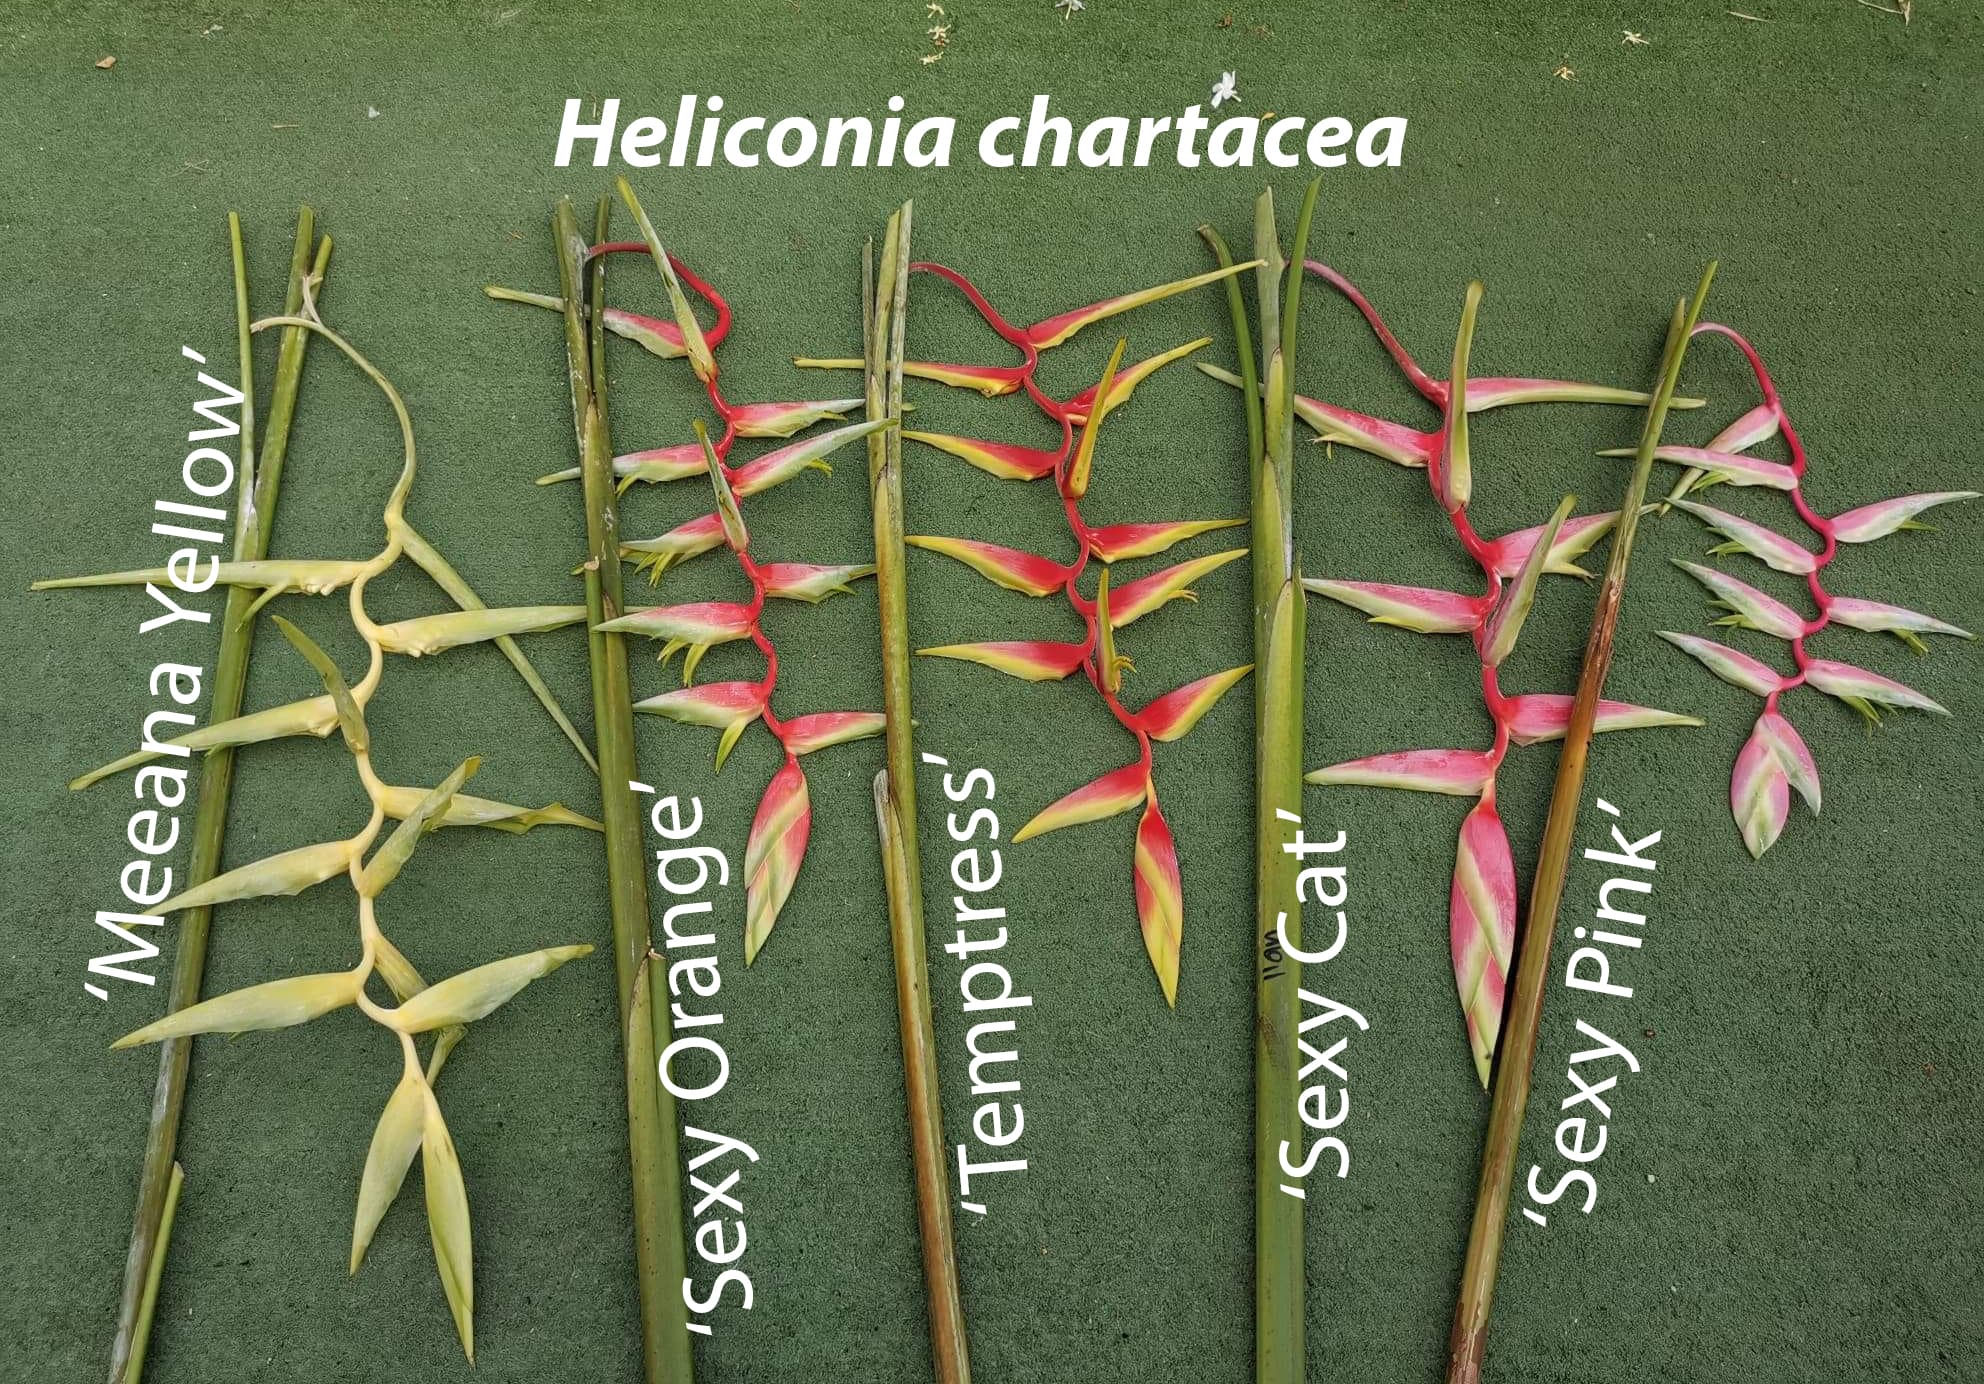 Heliconia chartacea cultivars for sale